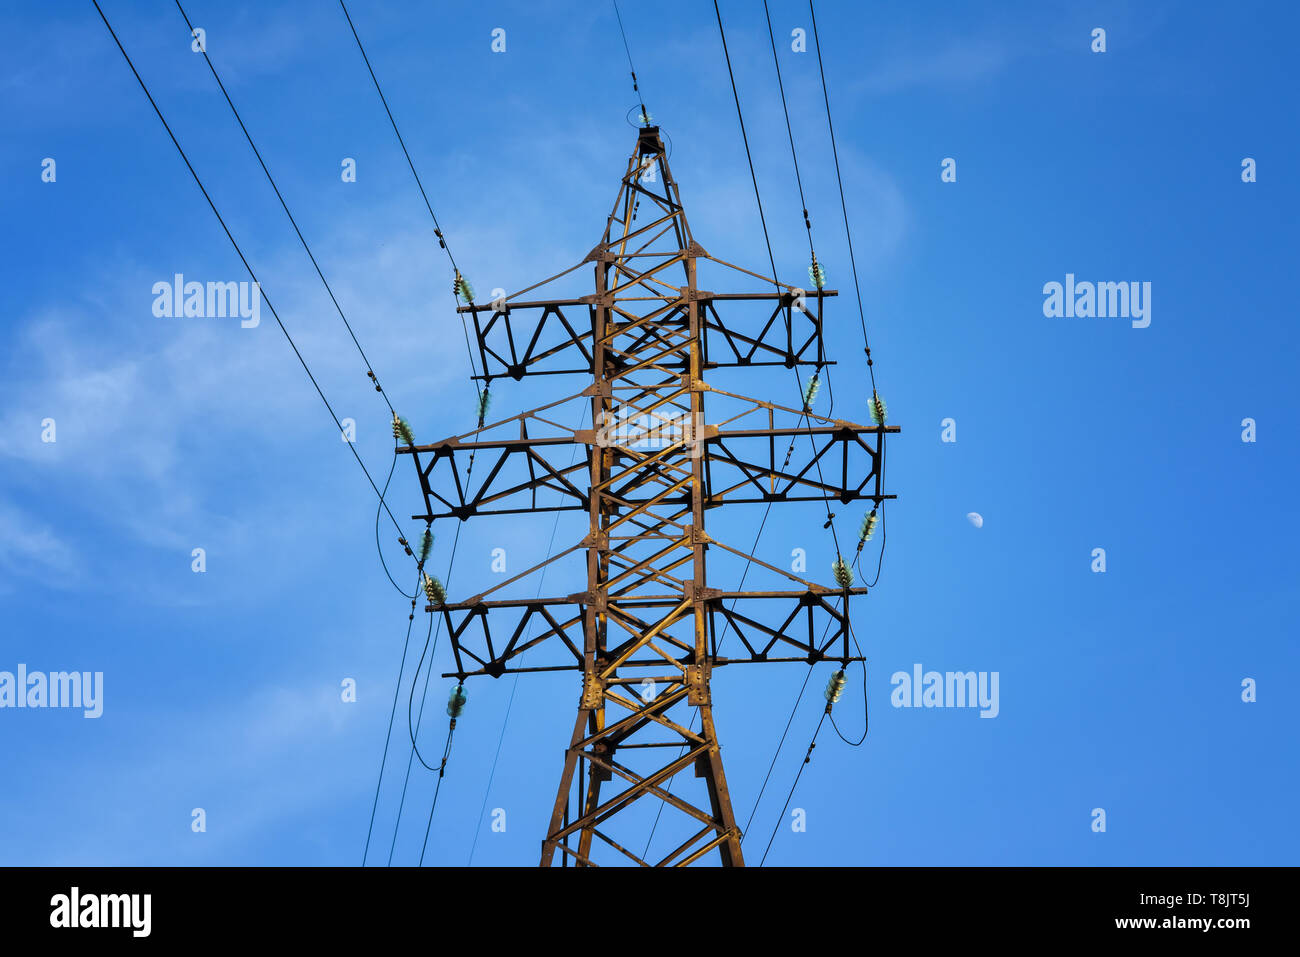 The pylon of the high-voltage power line against the blue sky. Stock Photo